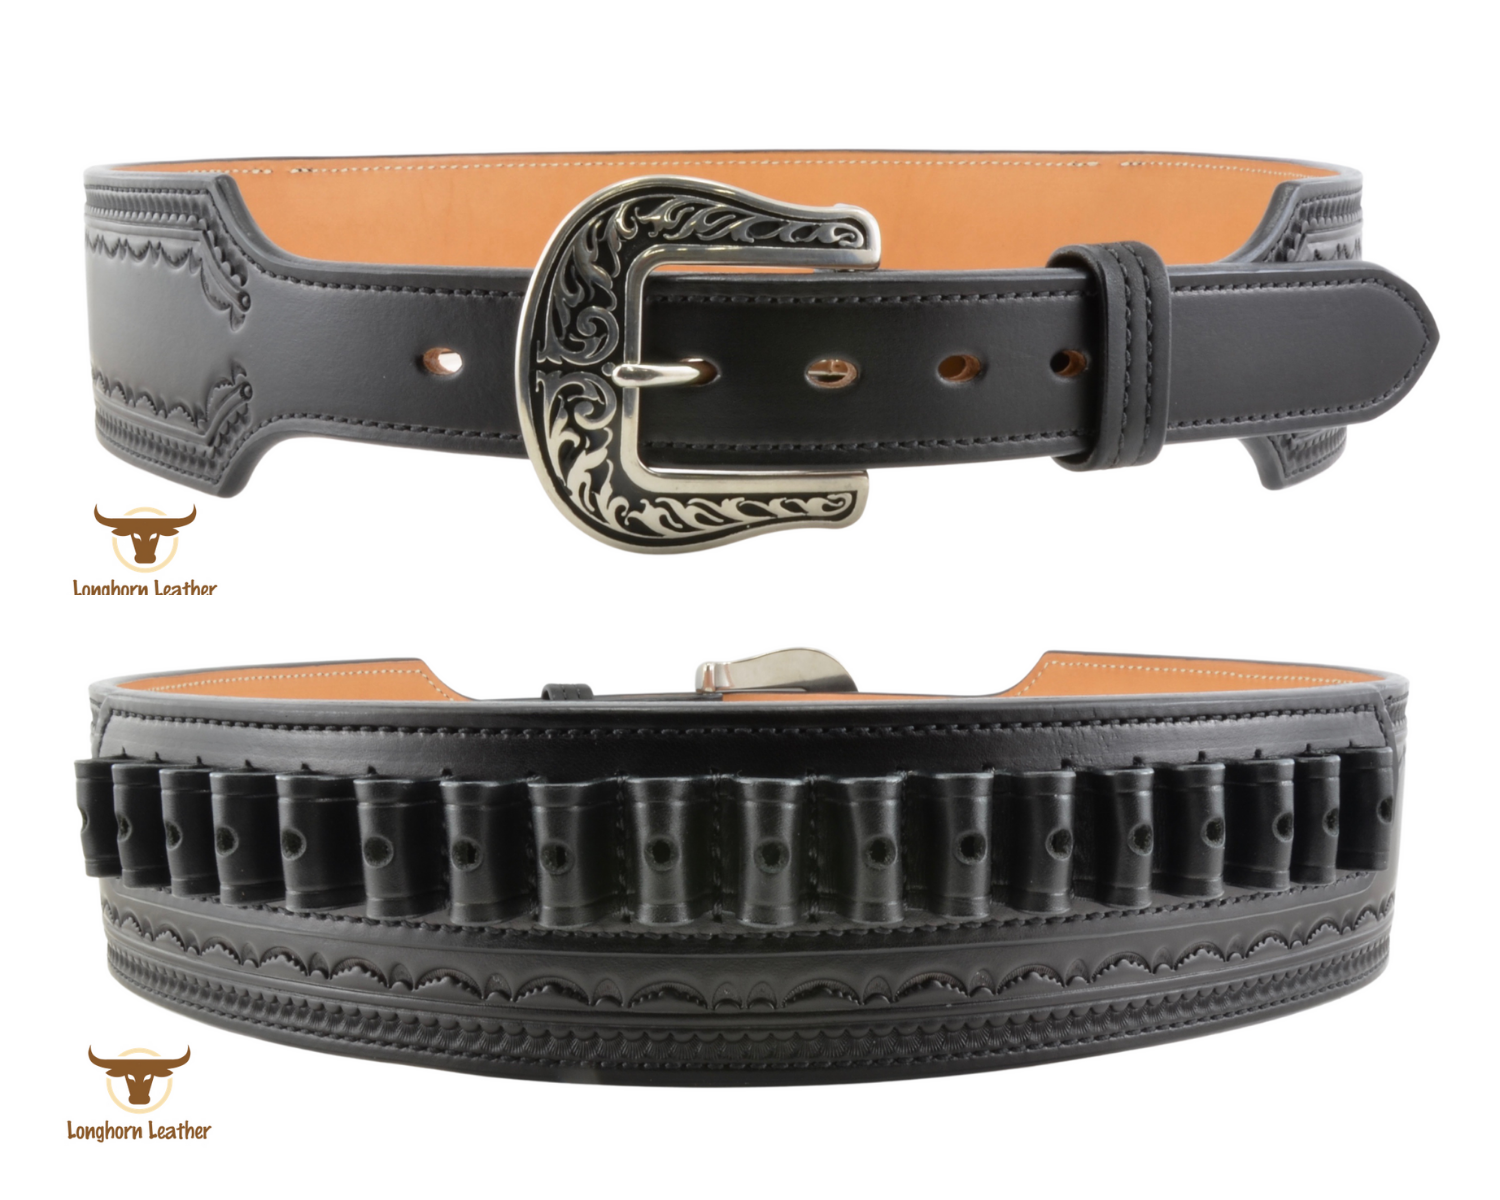 Custom leather cartridge belt featuring the "Deadwood" design.  Individually handcrafted at Longhorn Leather AZ.